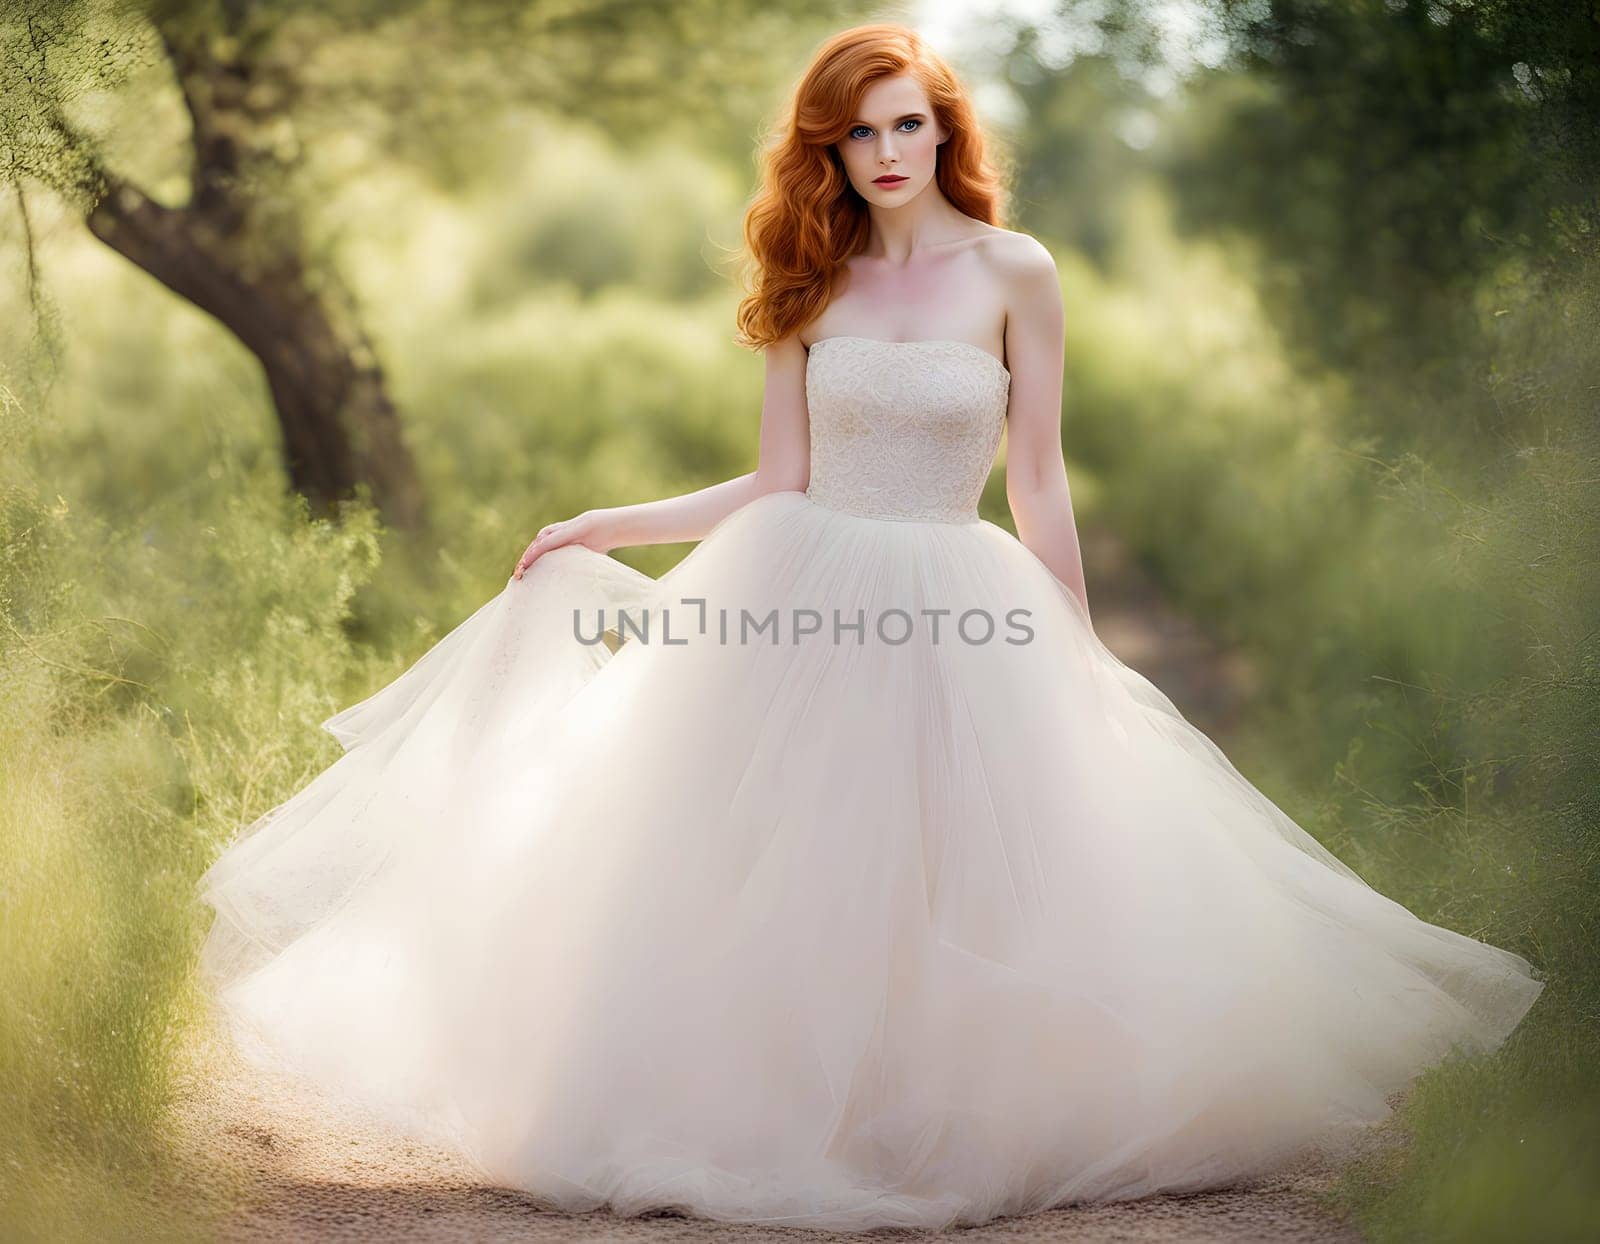 Elegant Bride in a Flowing Wedding Gown Outdoors by rostik924